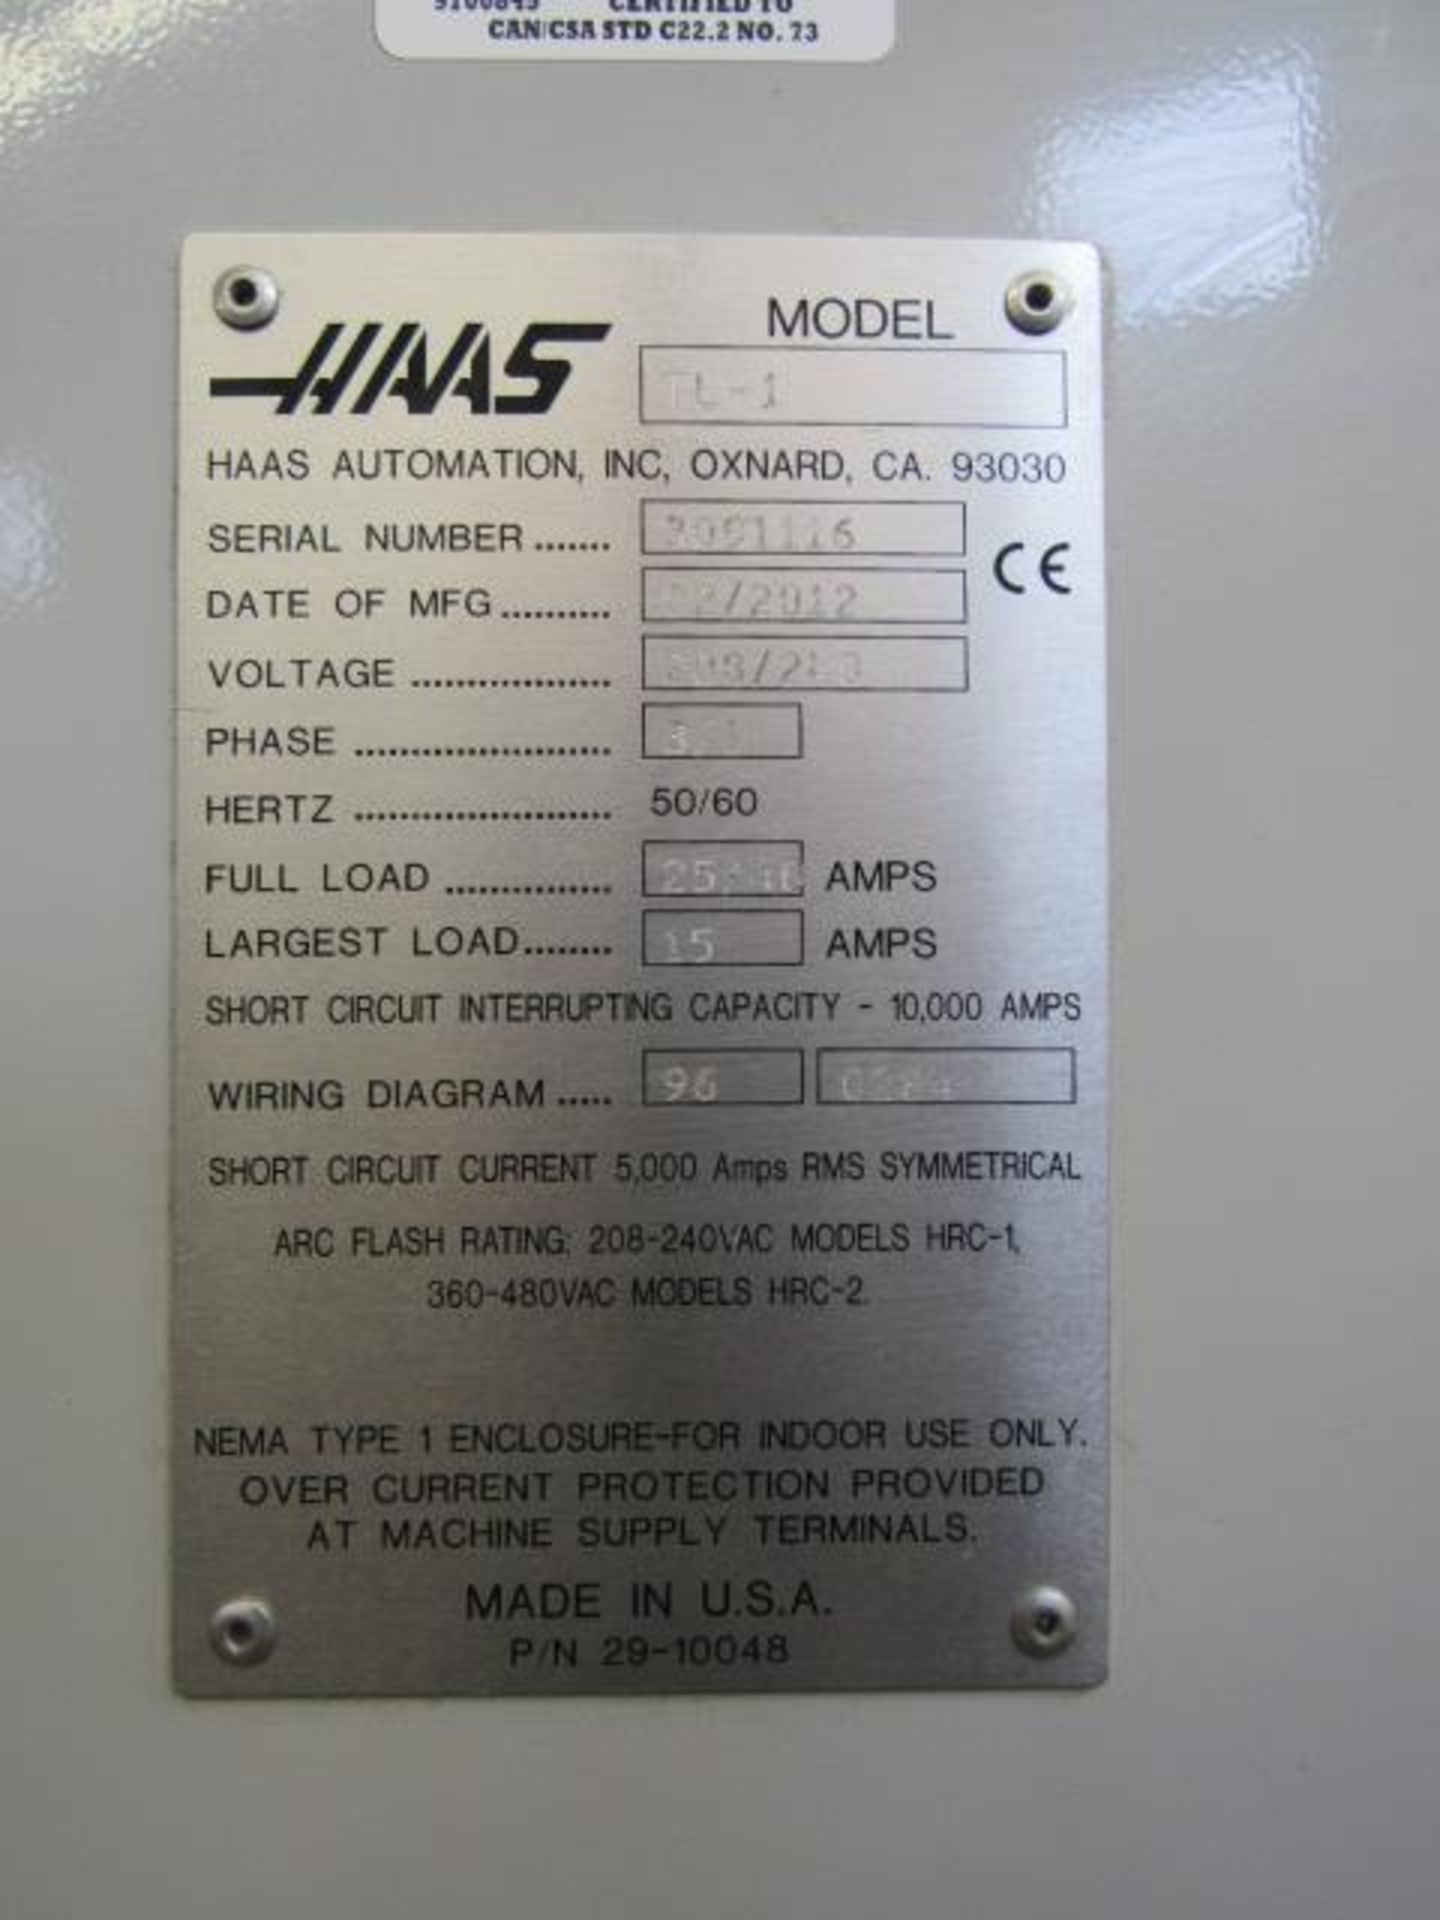 2012 HAAS TL-1 CNC Flatbed Lathe - Image 9 of 9